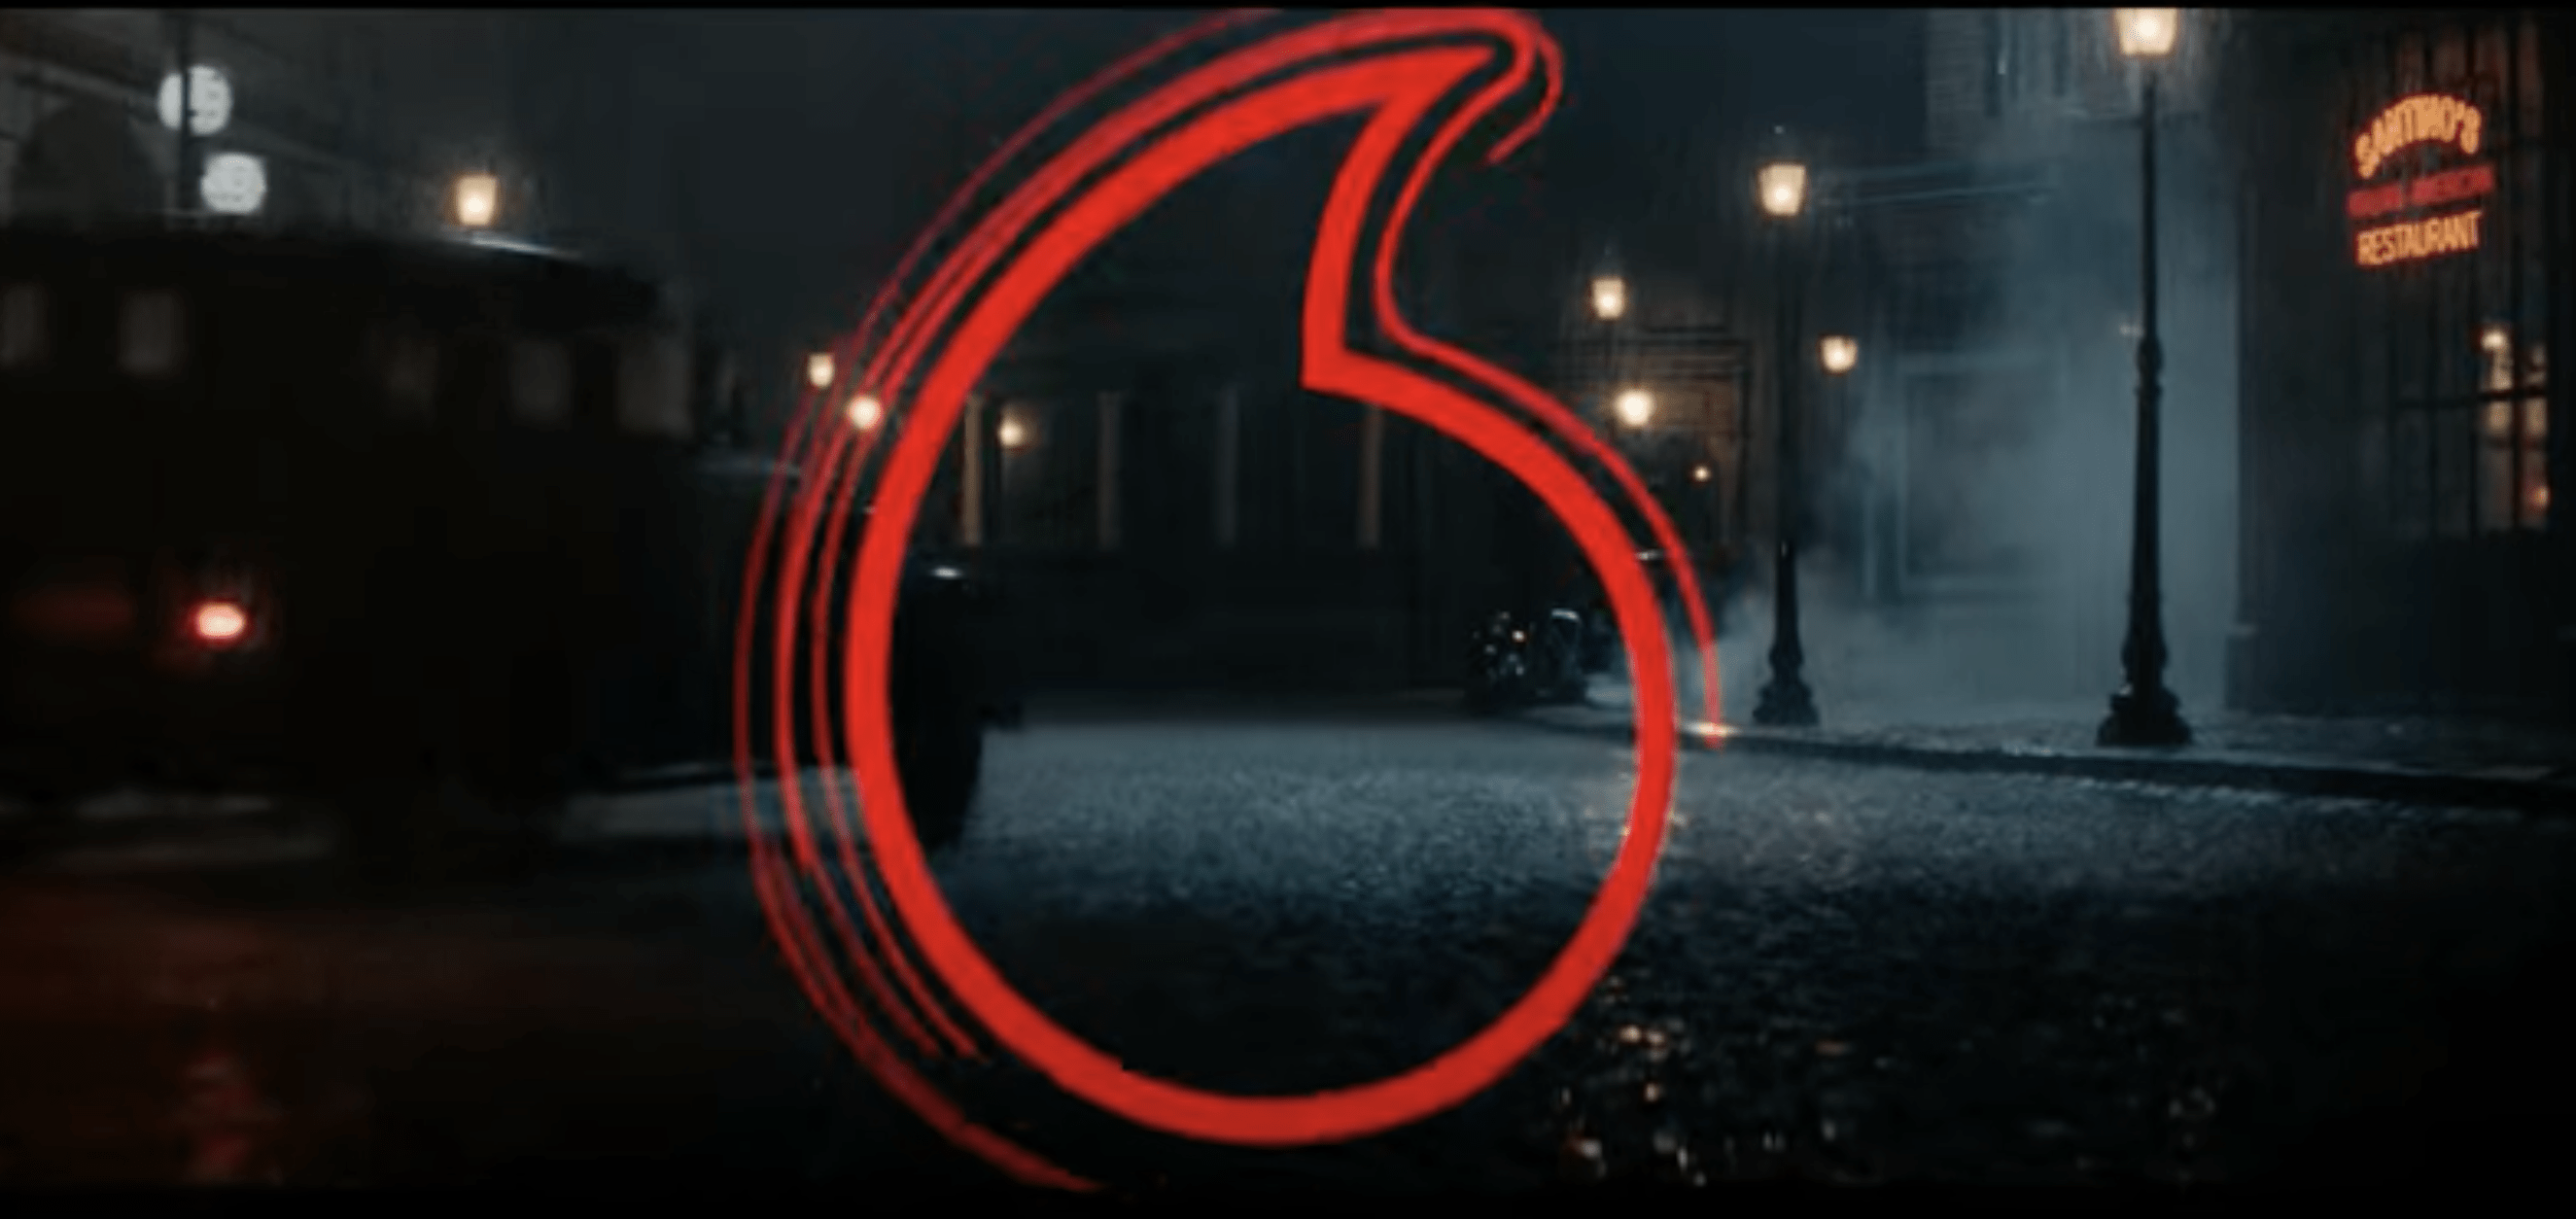 Vodafone Ireland launches new TV offering in new campaign